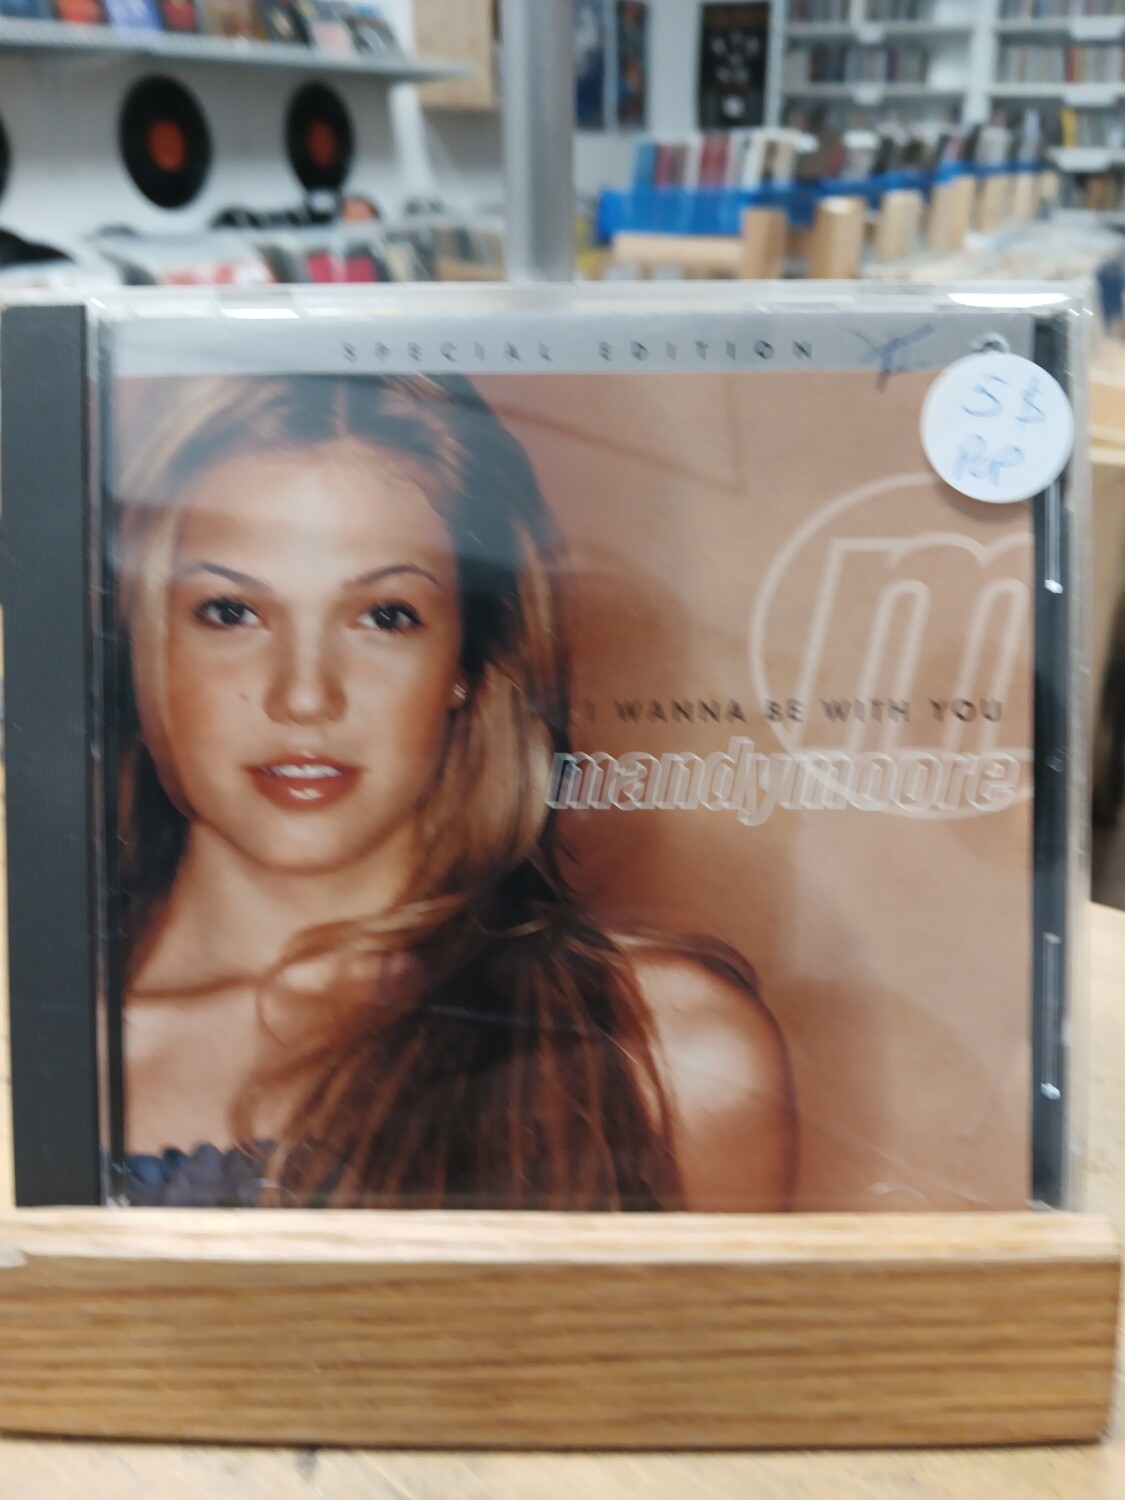 MANDY MOORE - I wanna be with you (CD)